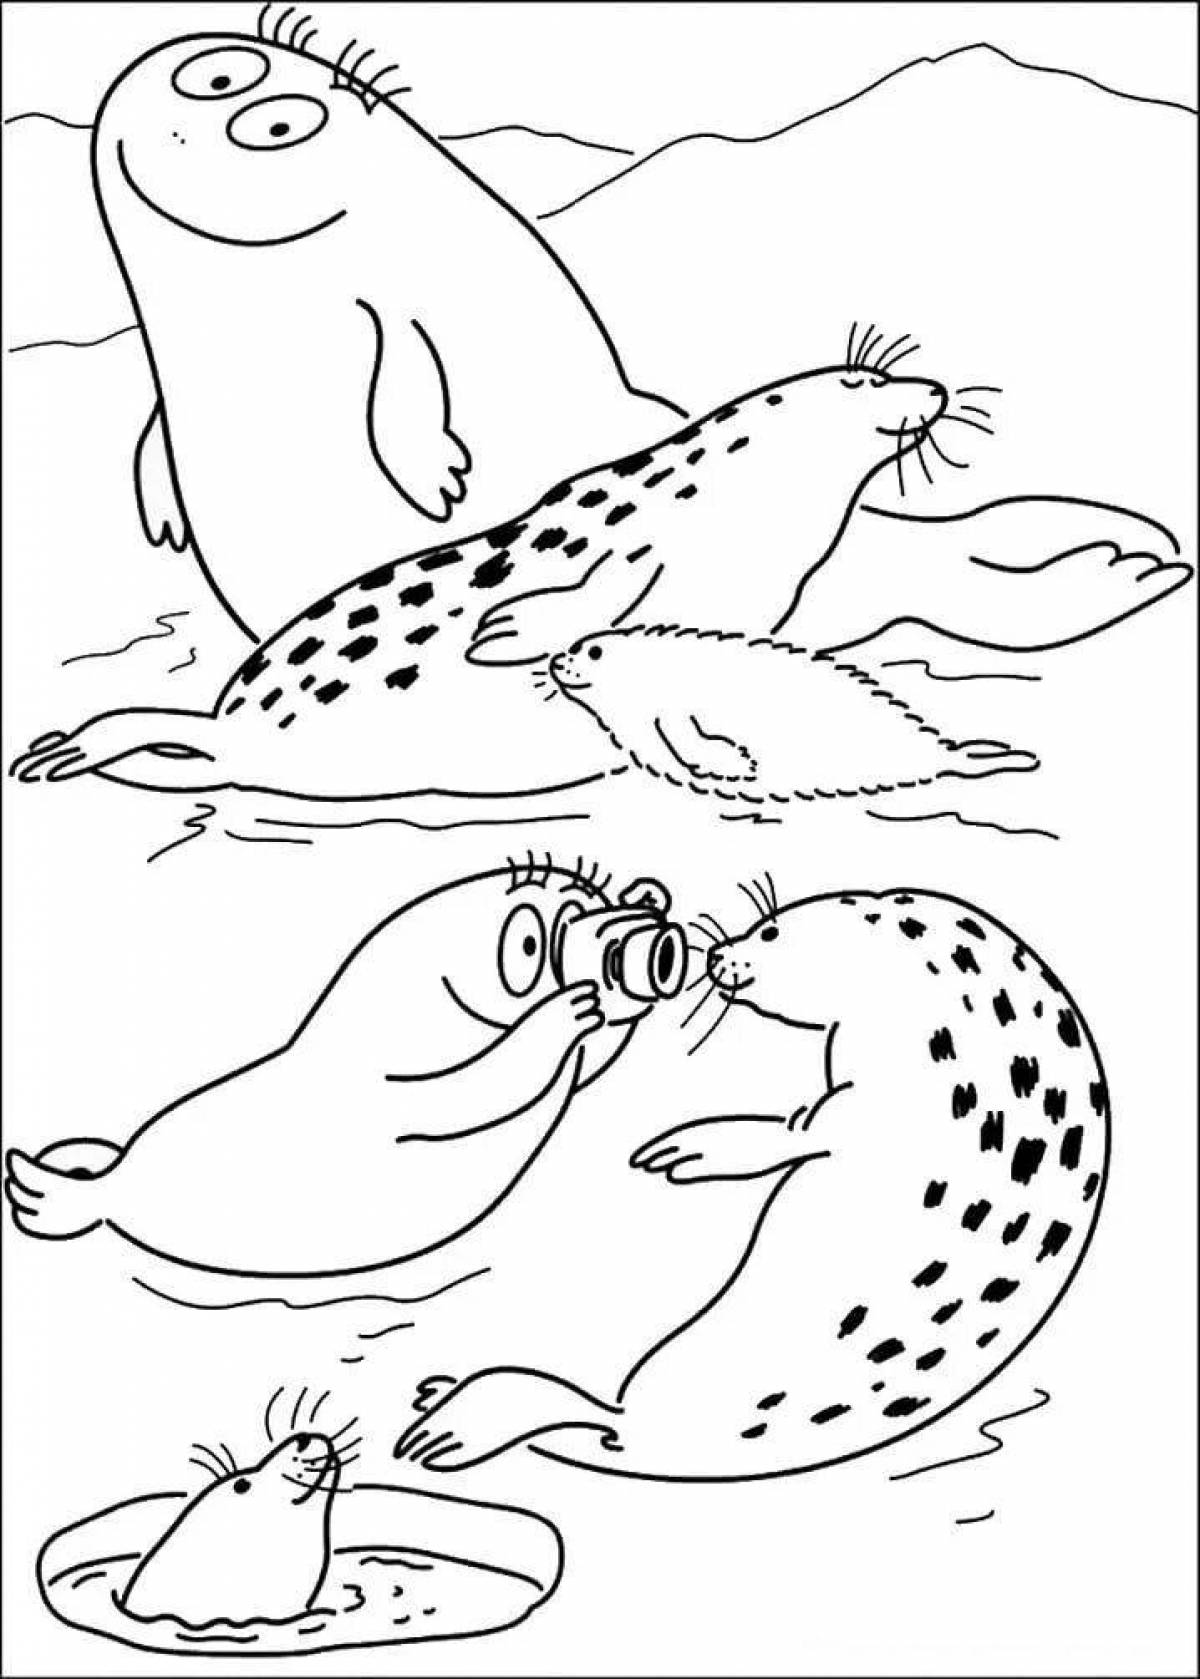 Dazzling leopard seal coloring page